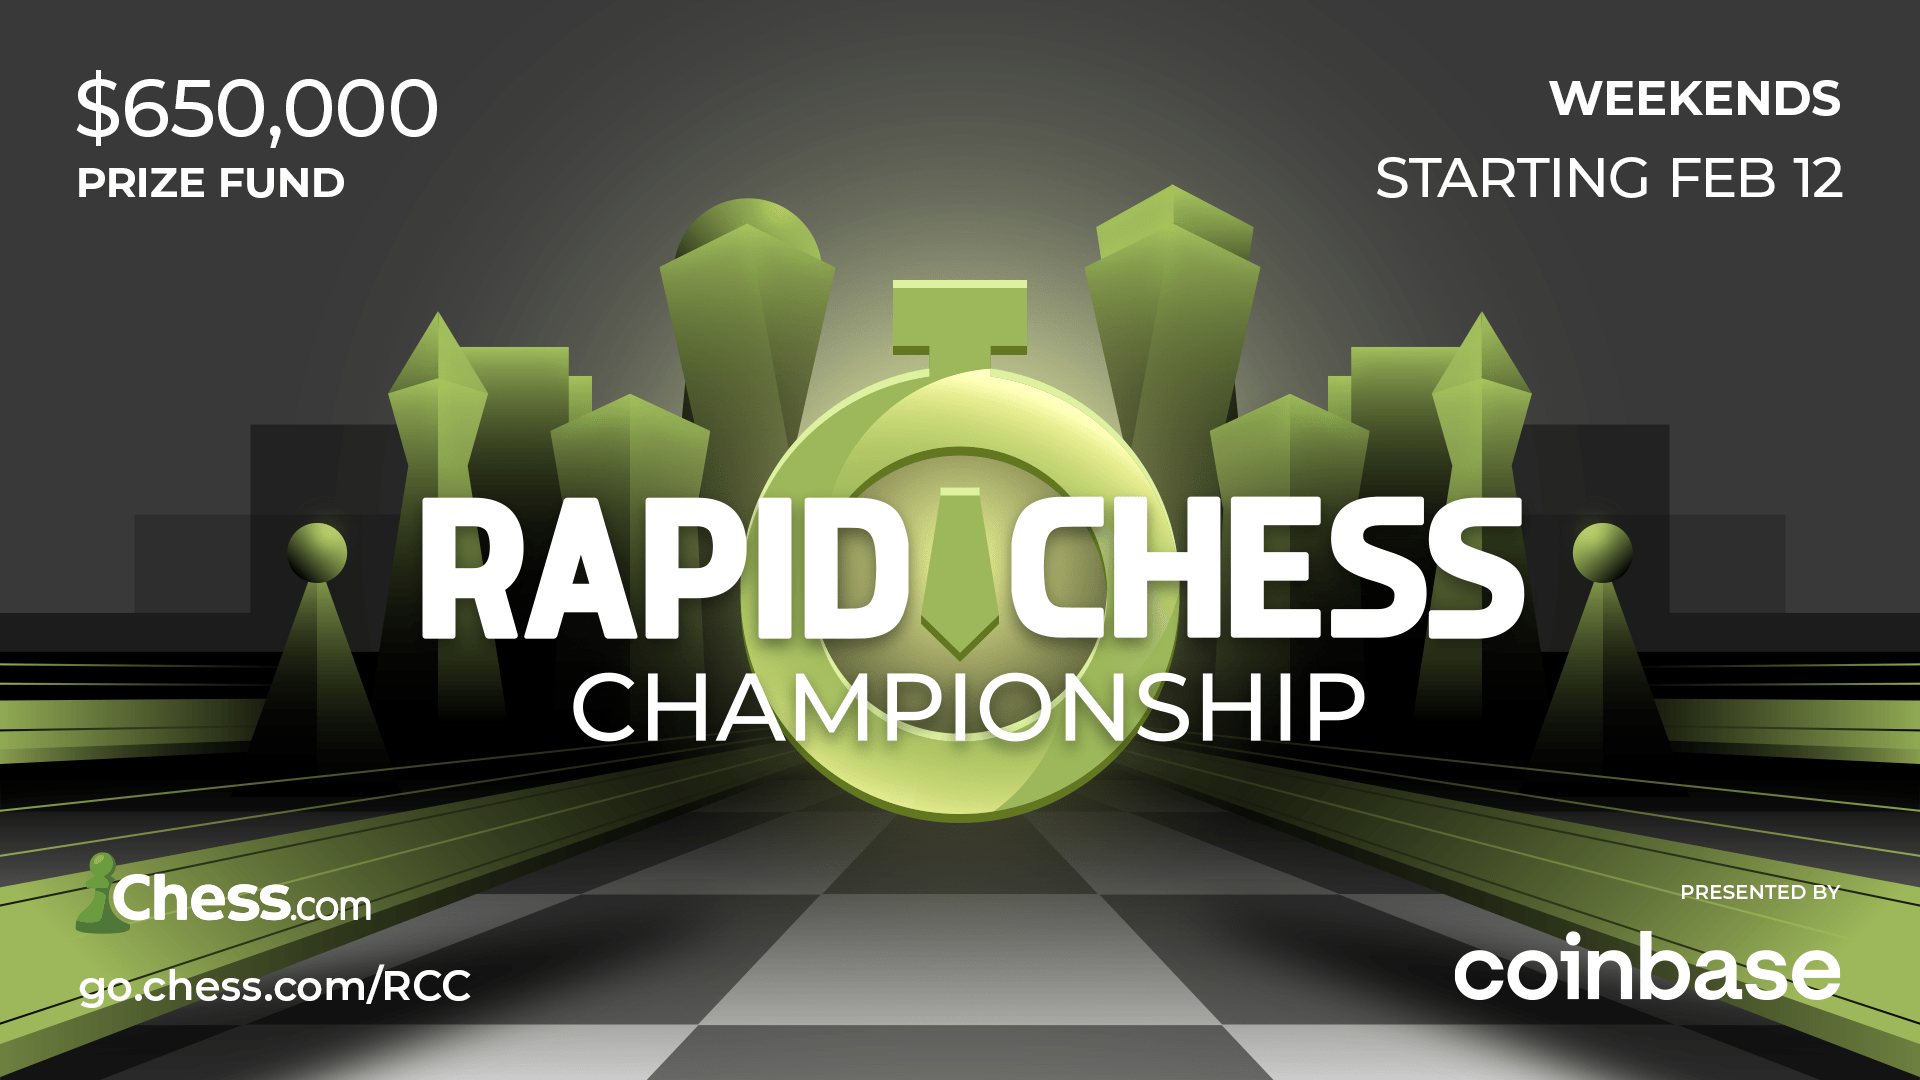 5 Reasons To Watch The 2022 Rapid Chess Championship